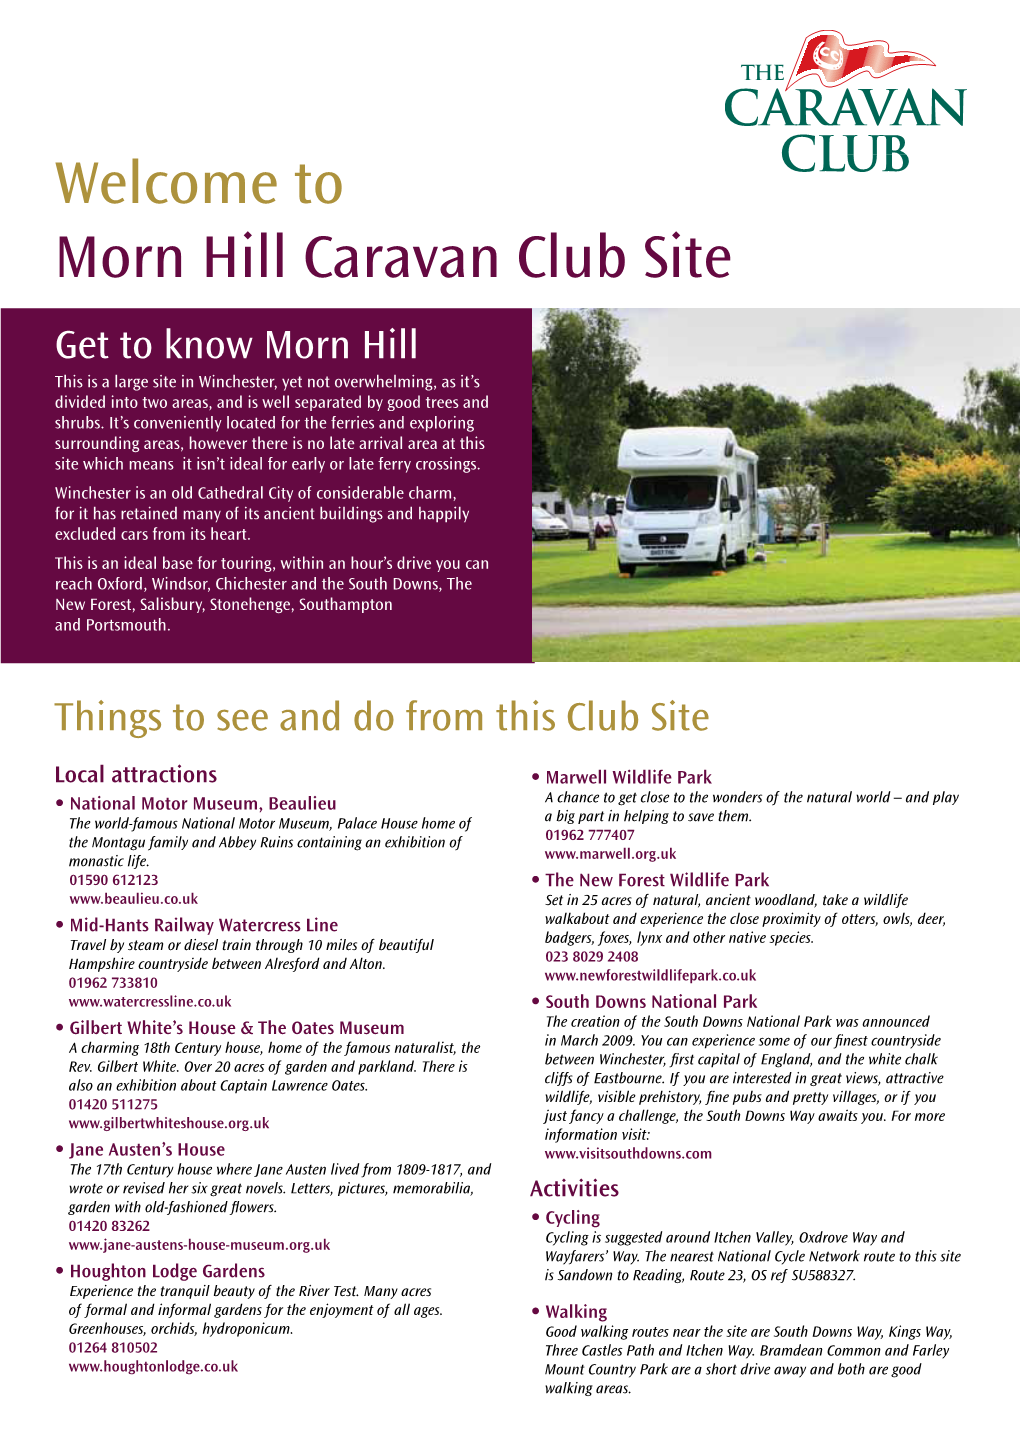 Welcome to Morn Hill Caravan Club Site